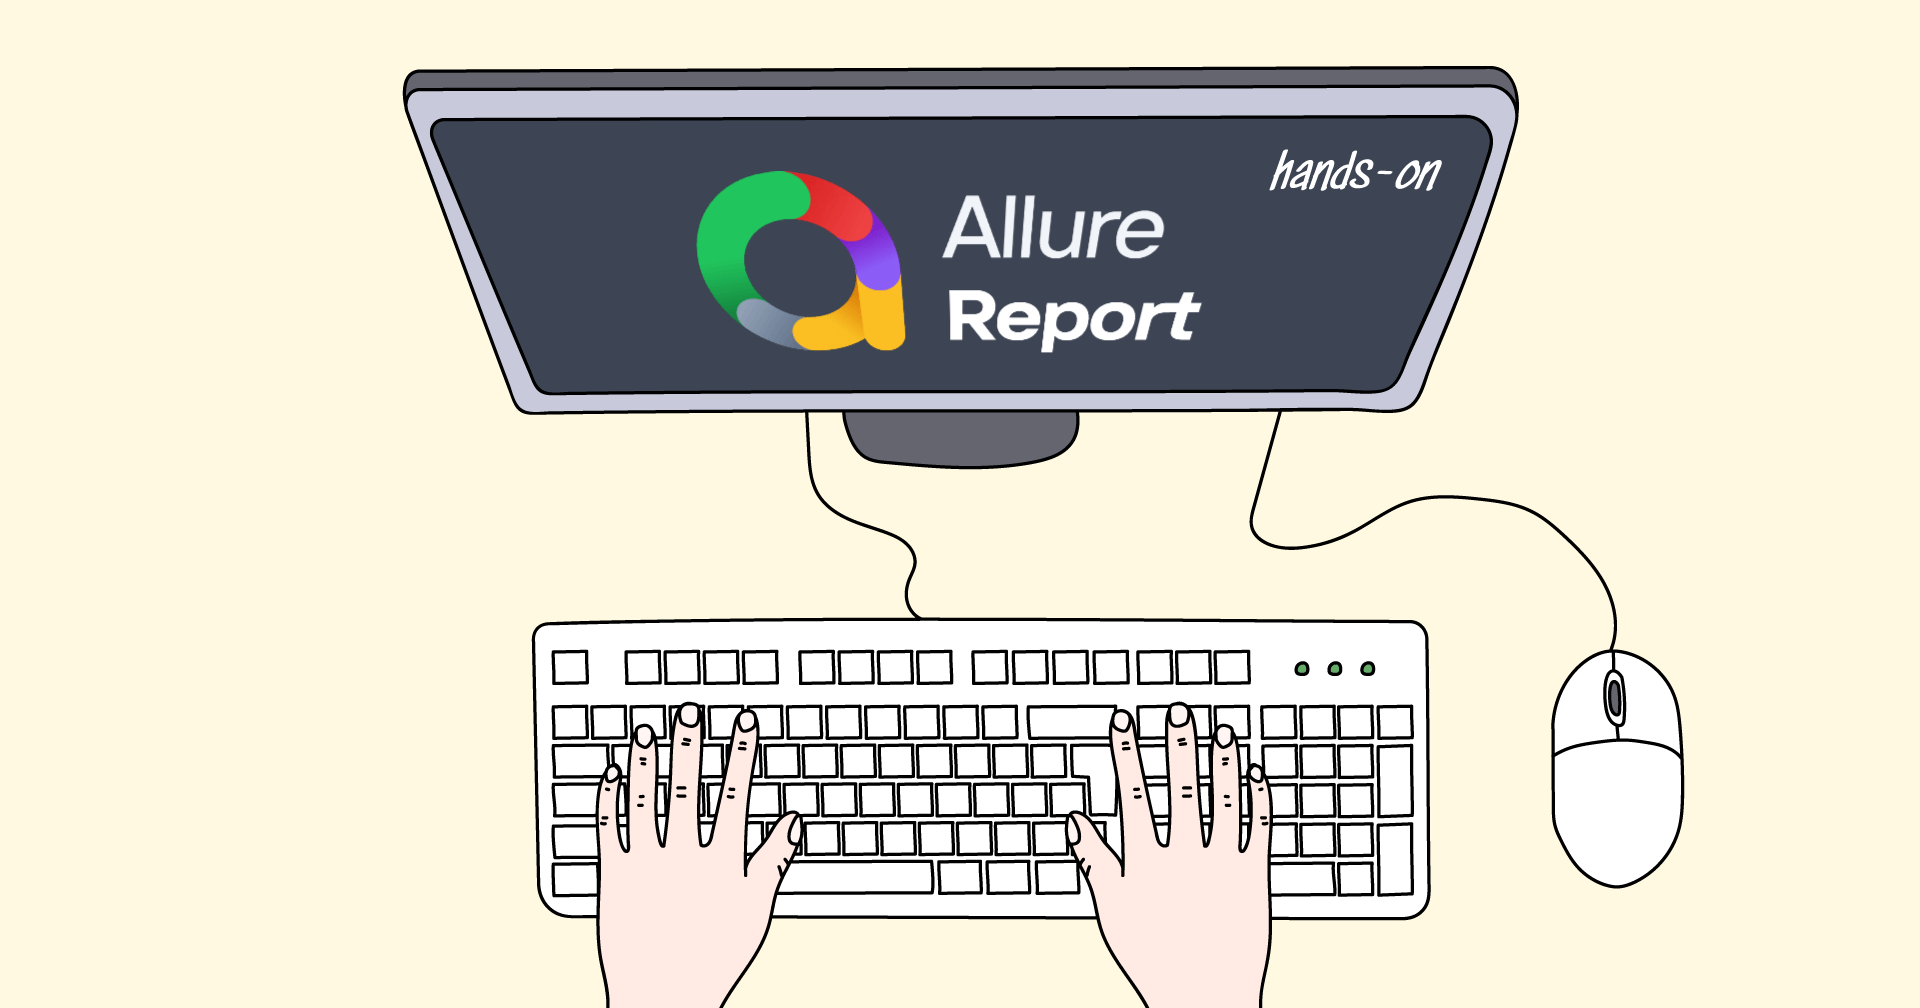 Allure Report Hands-on Guide